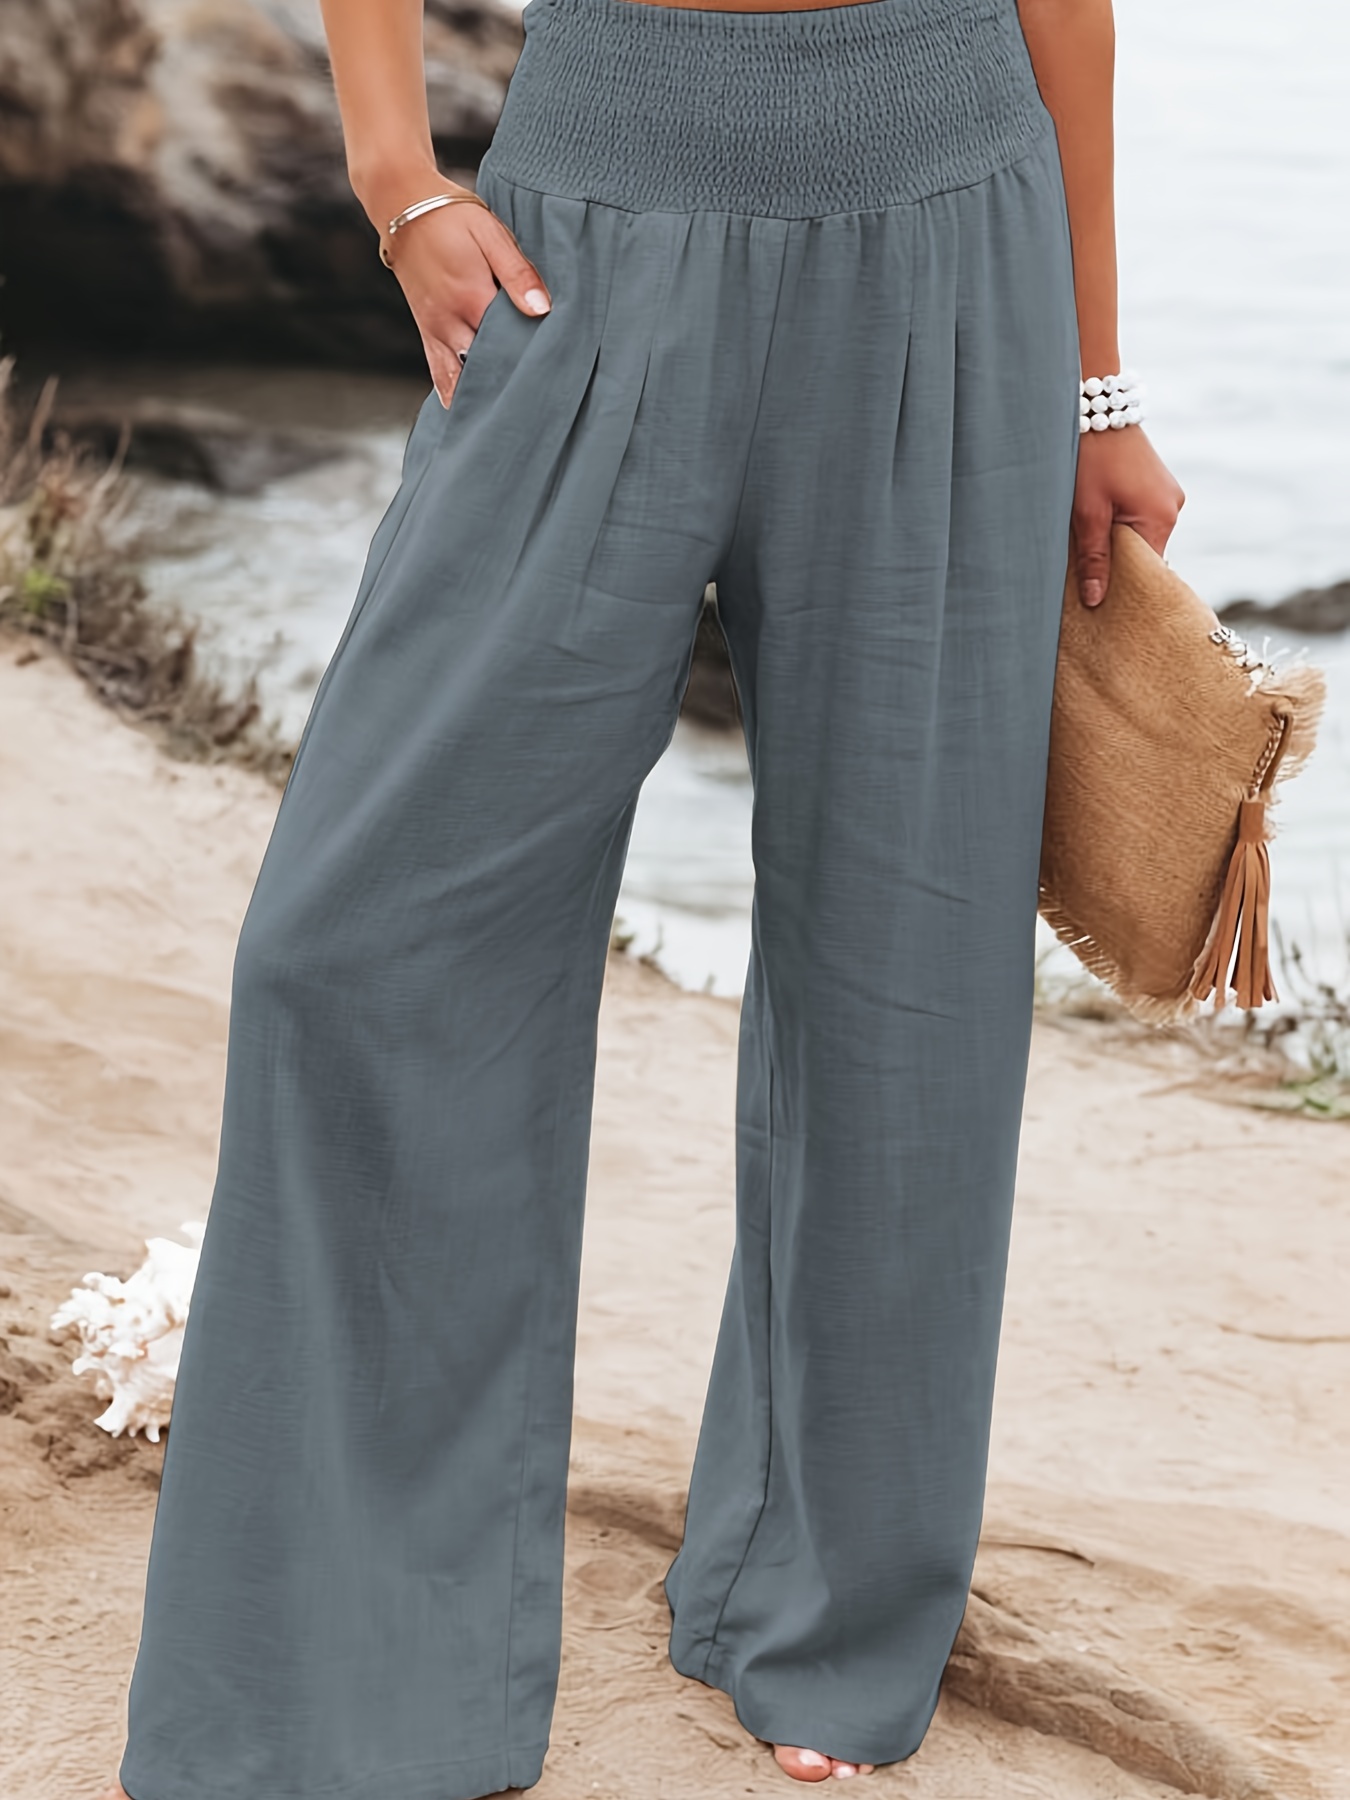 Zanvin Fall Clothes for Women Savings! Women's Fashion Casual Full-Length  Loose Pants Solid High Waist Trousers Long Straight Wide Leg Pants Gray XL